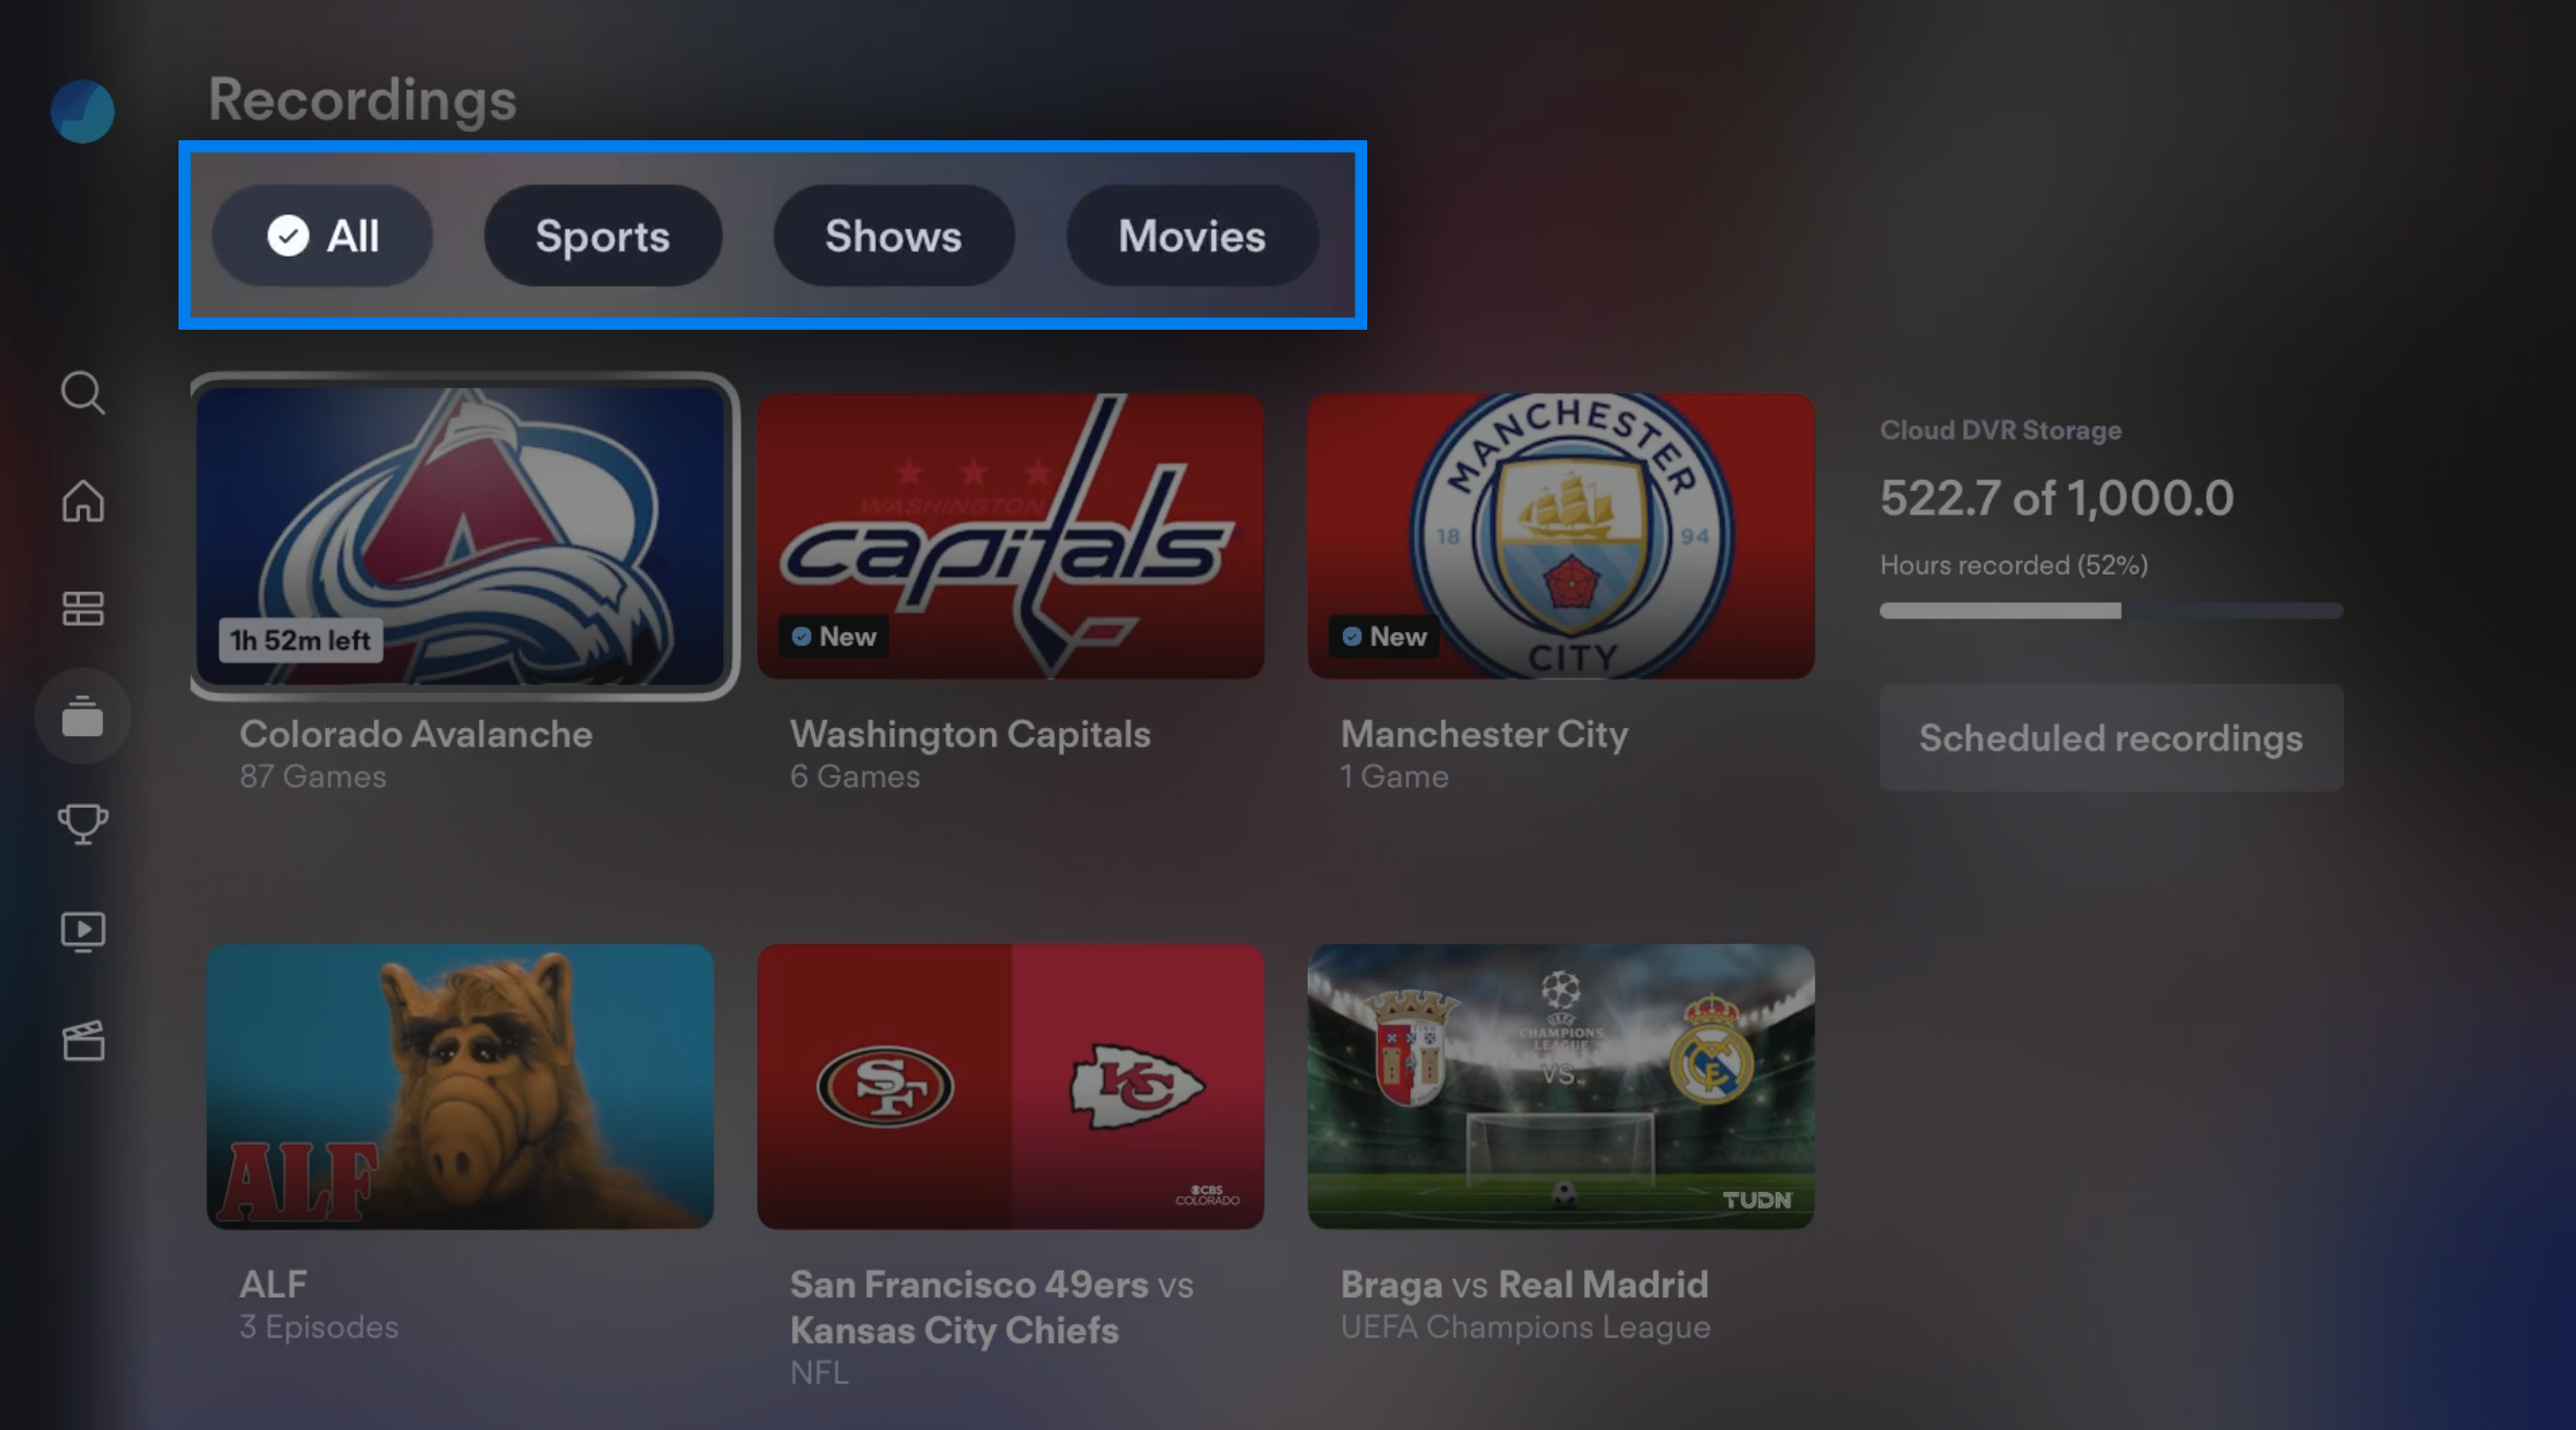 Scheduled upcoming Cloud DVR recordings for the FuboTV app on Apple TV